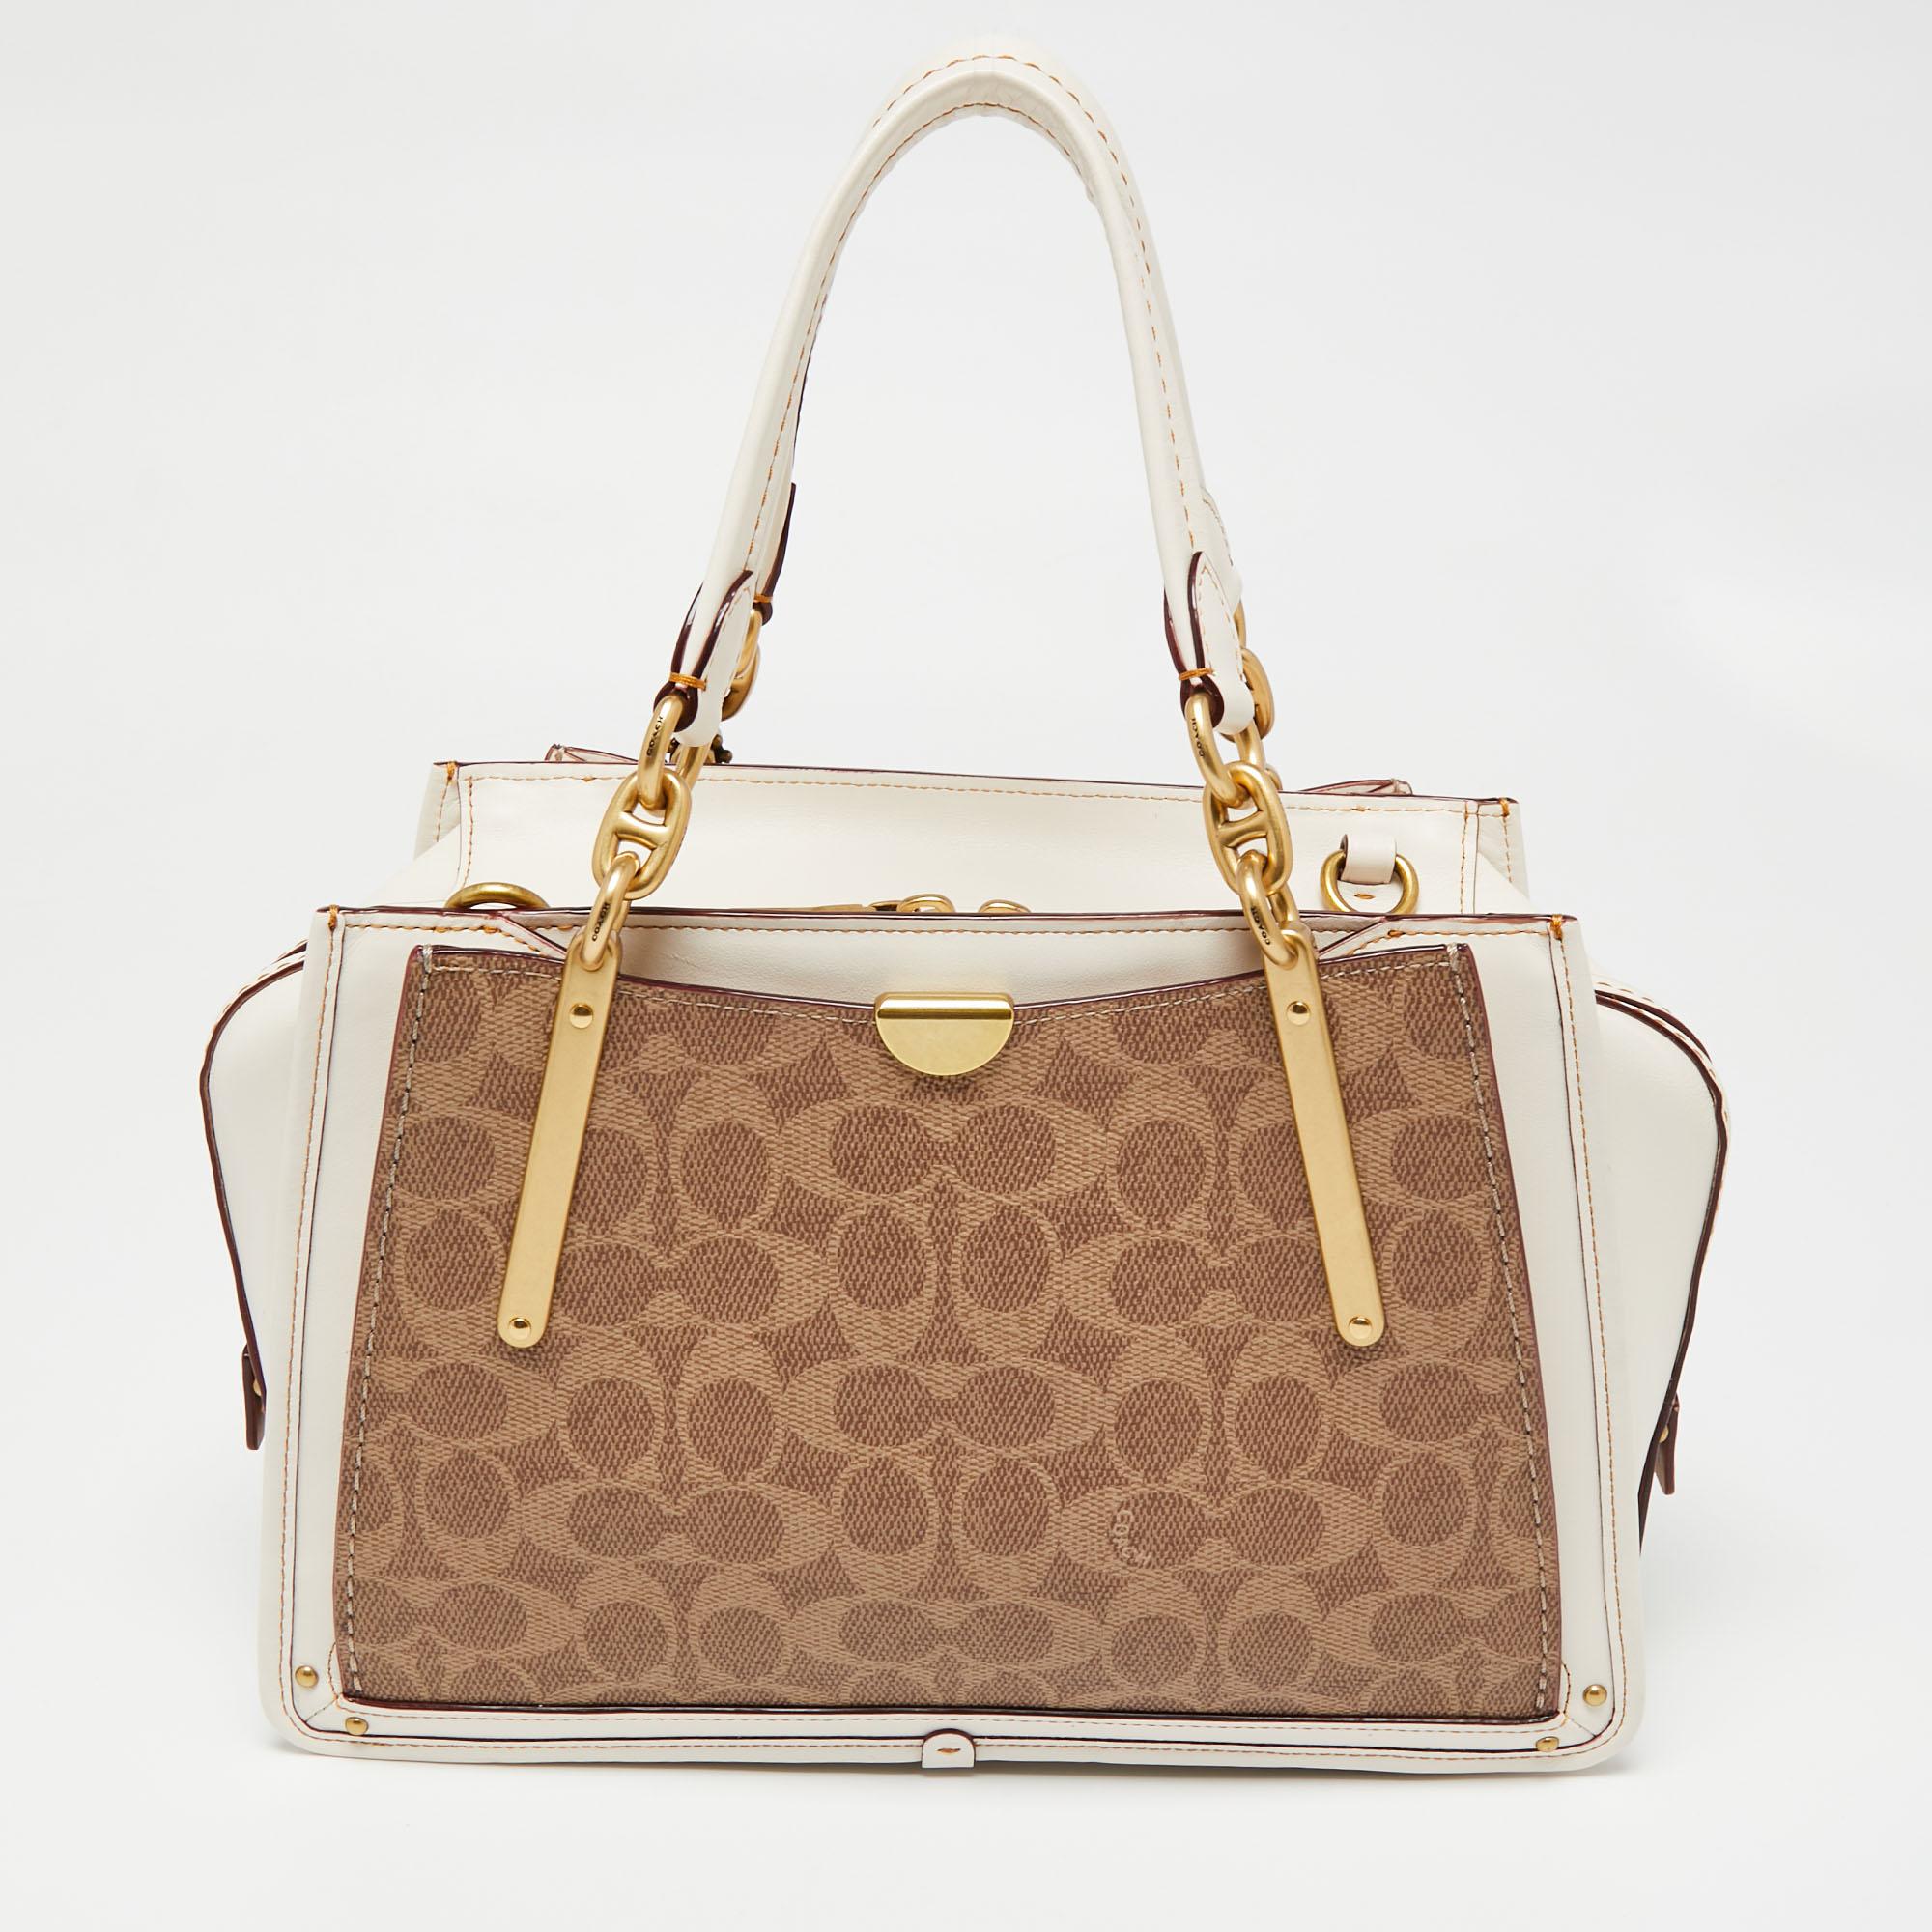 The white trim against the beige exterior lends this Coach Dreamer satchel a luxe contrast. Created from the signature coated canvas and leather, it is defined by dual handles at the top, a shoulder strap, and gold-tone hardware. The top zipper